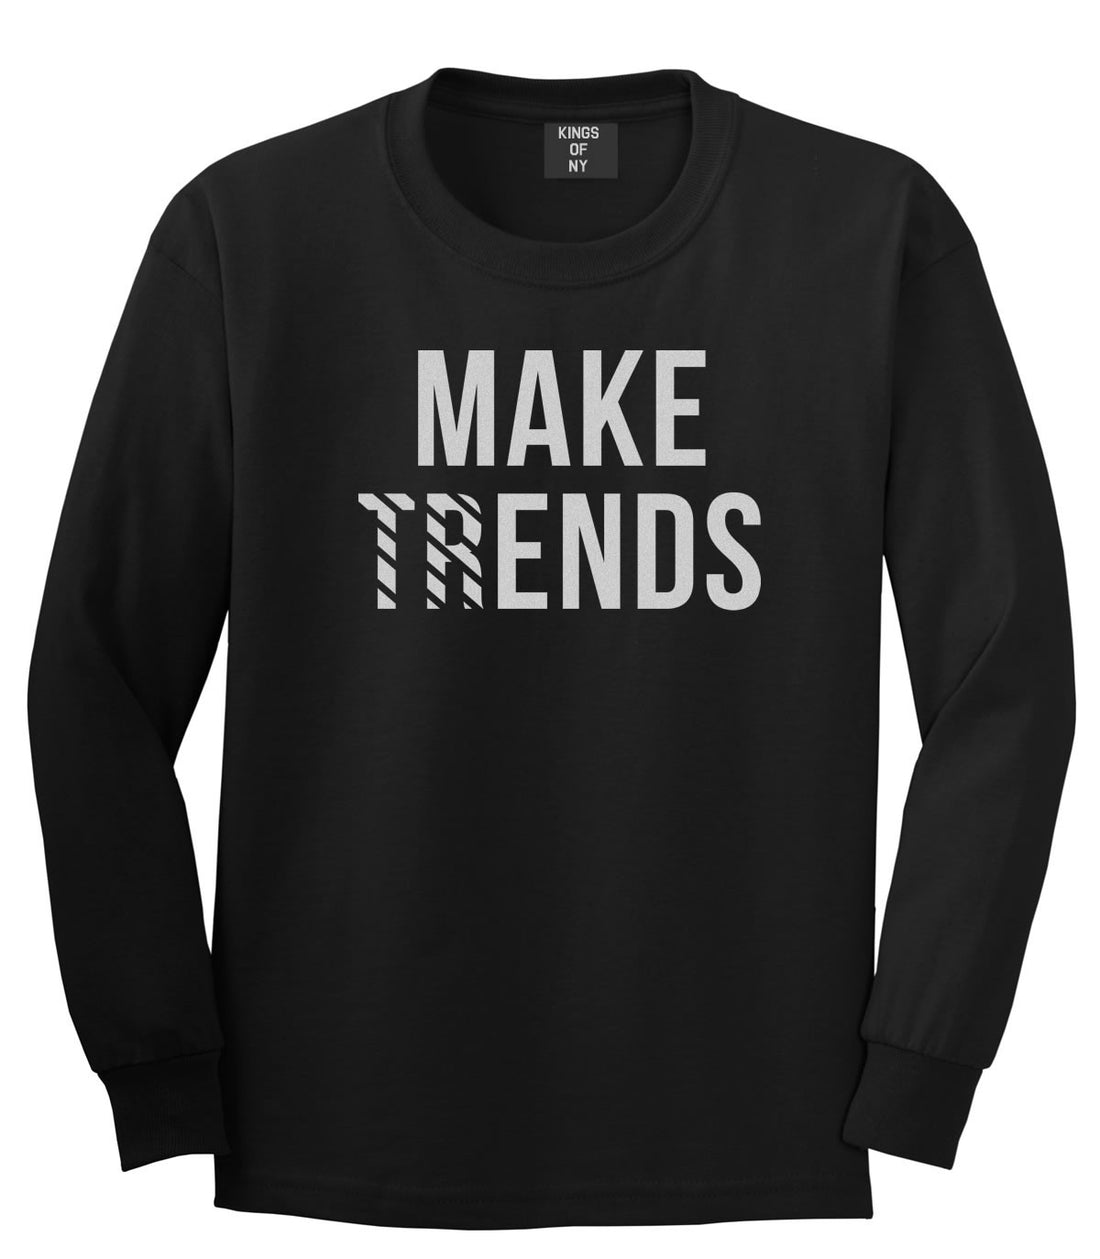 Make Trends Make Ends Long Sleeve T-Shirt in Black by Kings Of NY